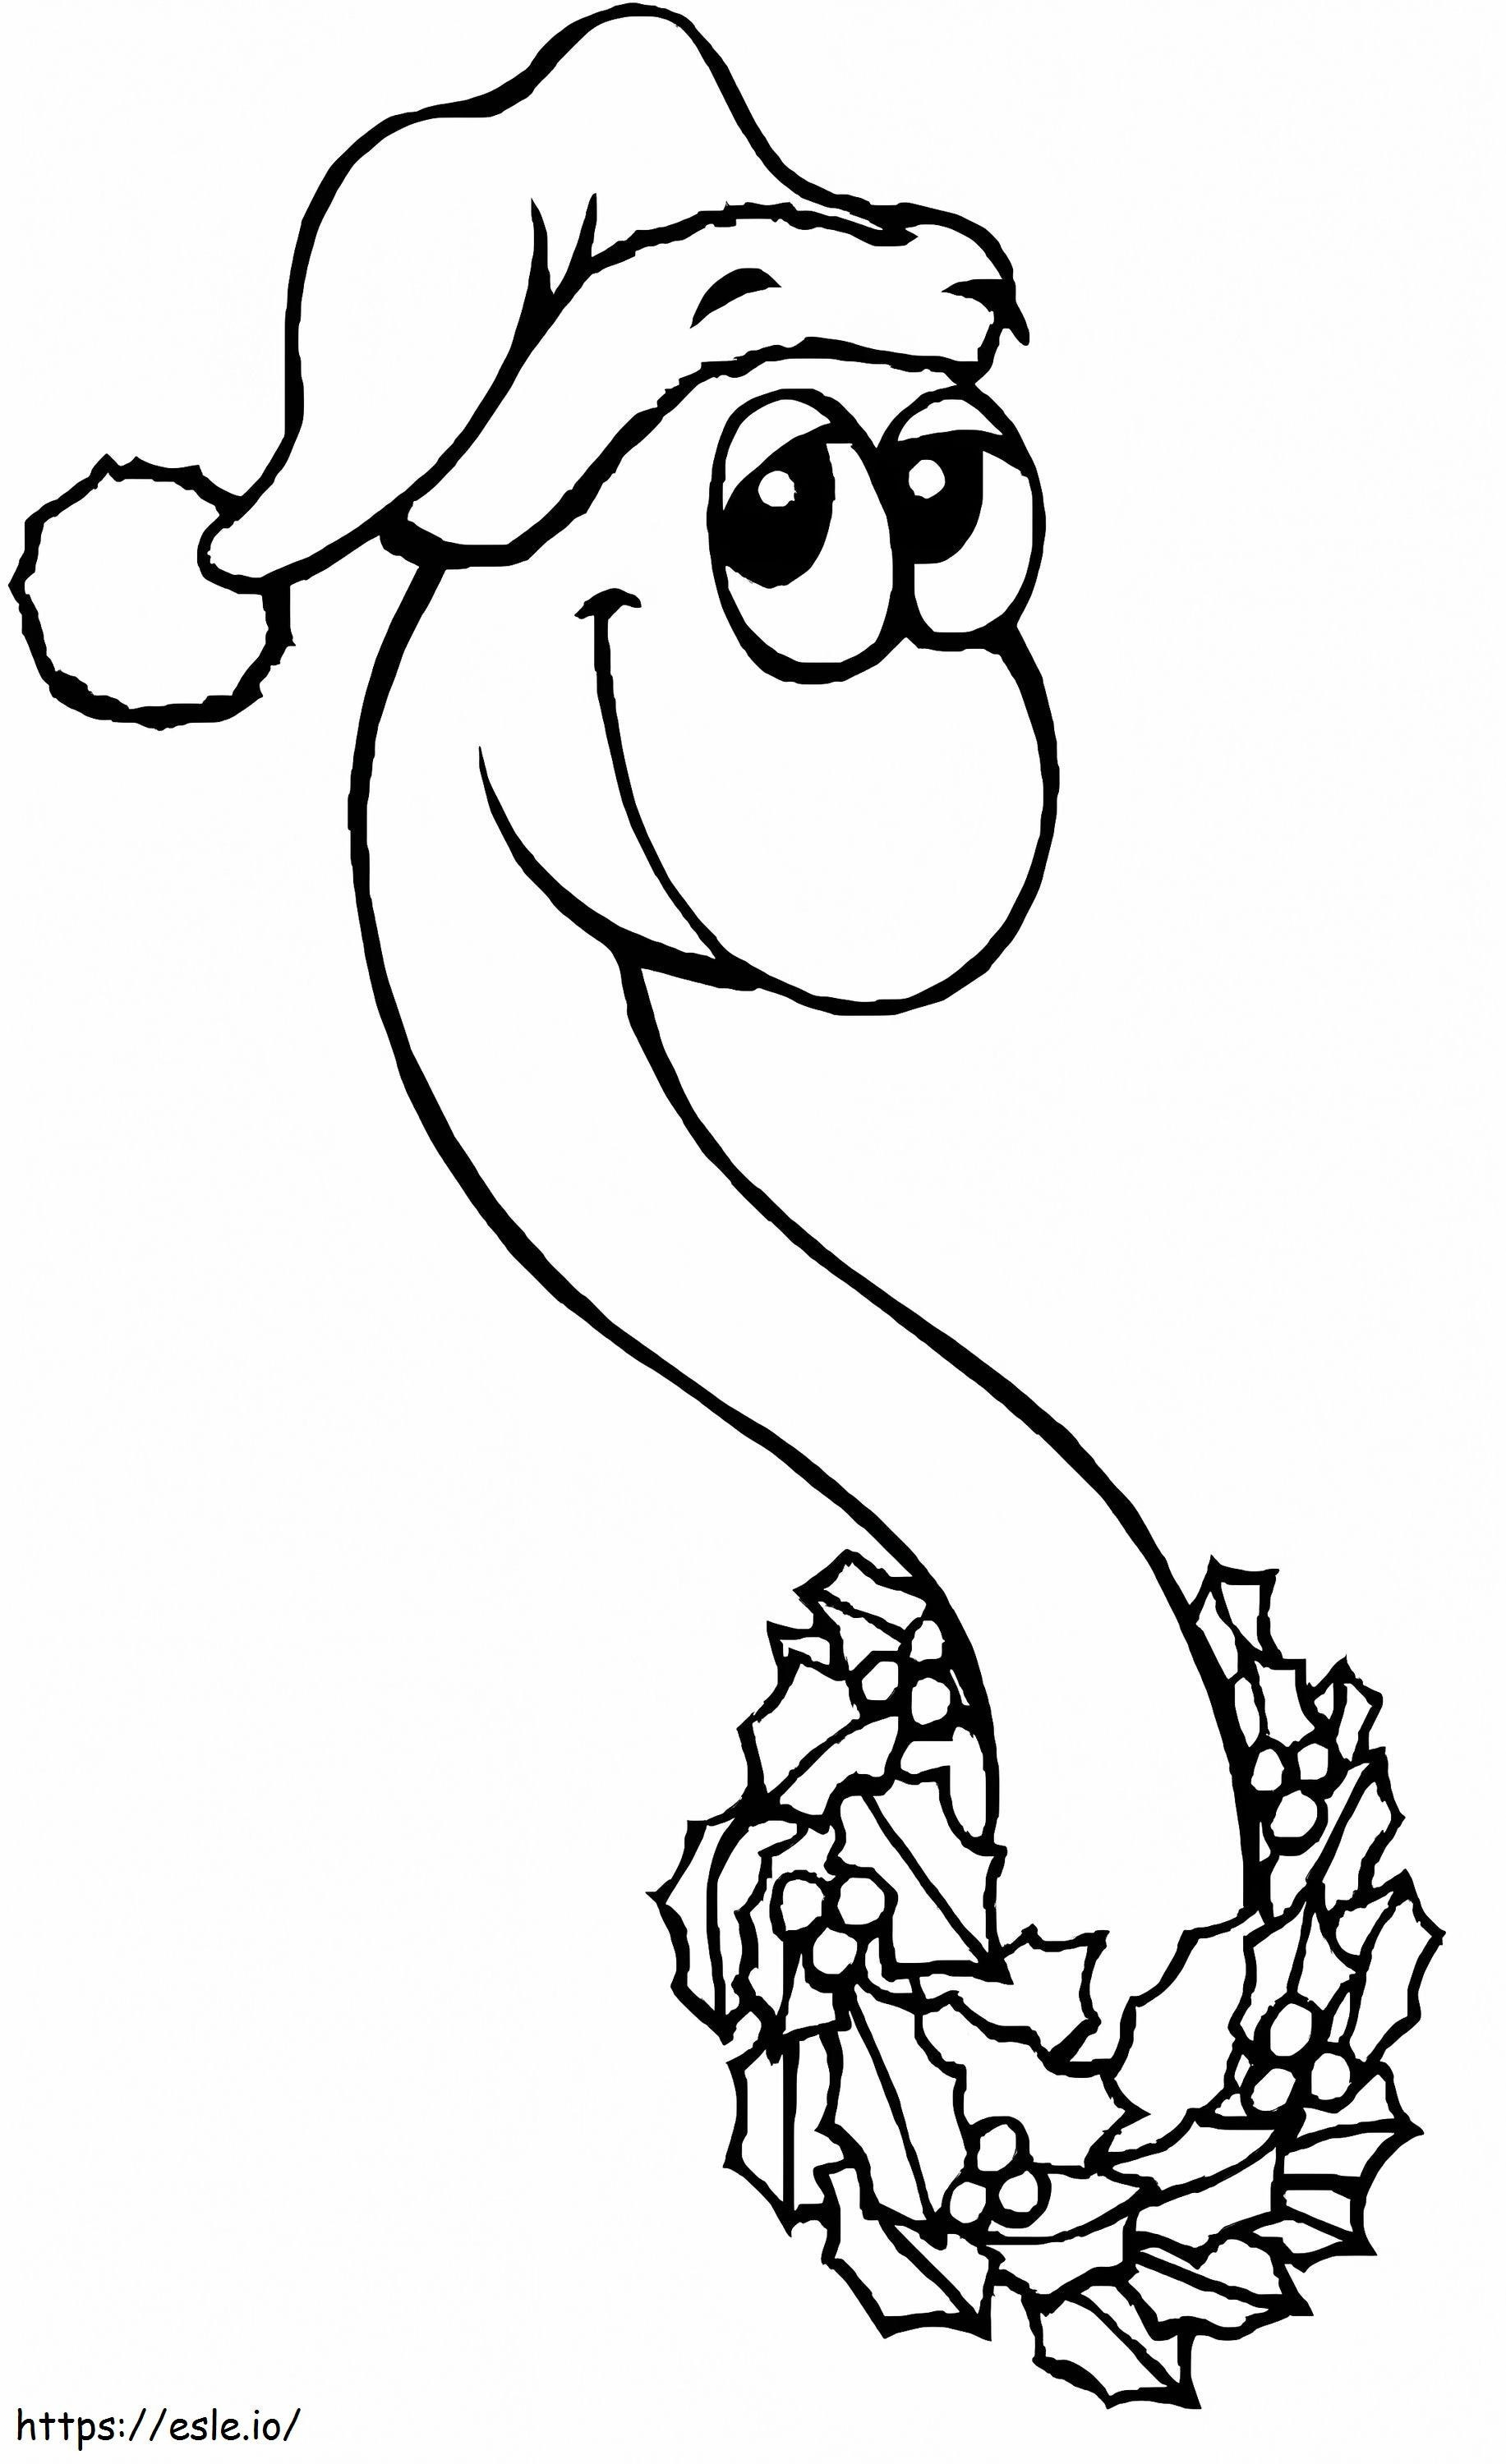 Worm At Christmas coloring page